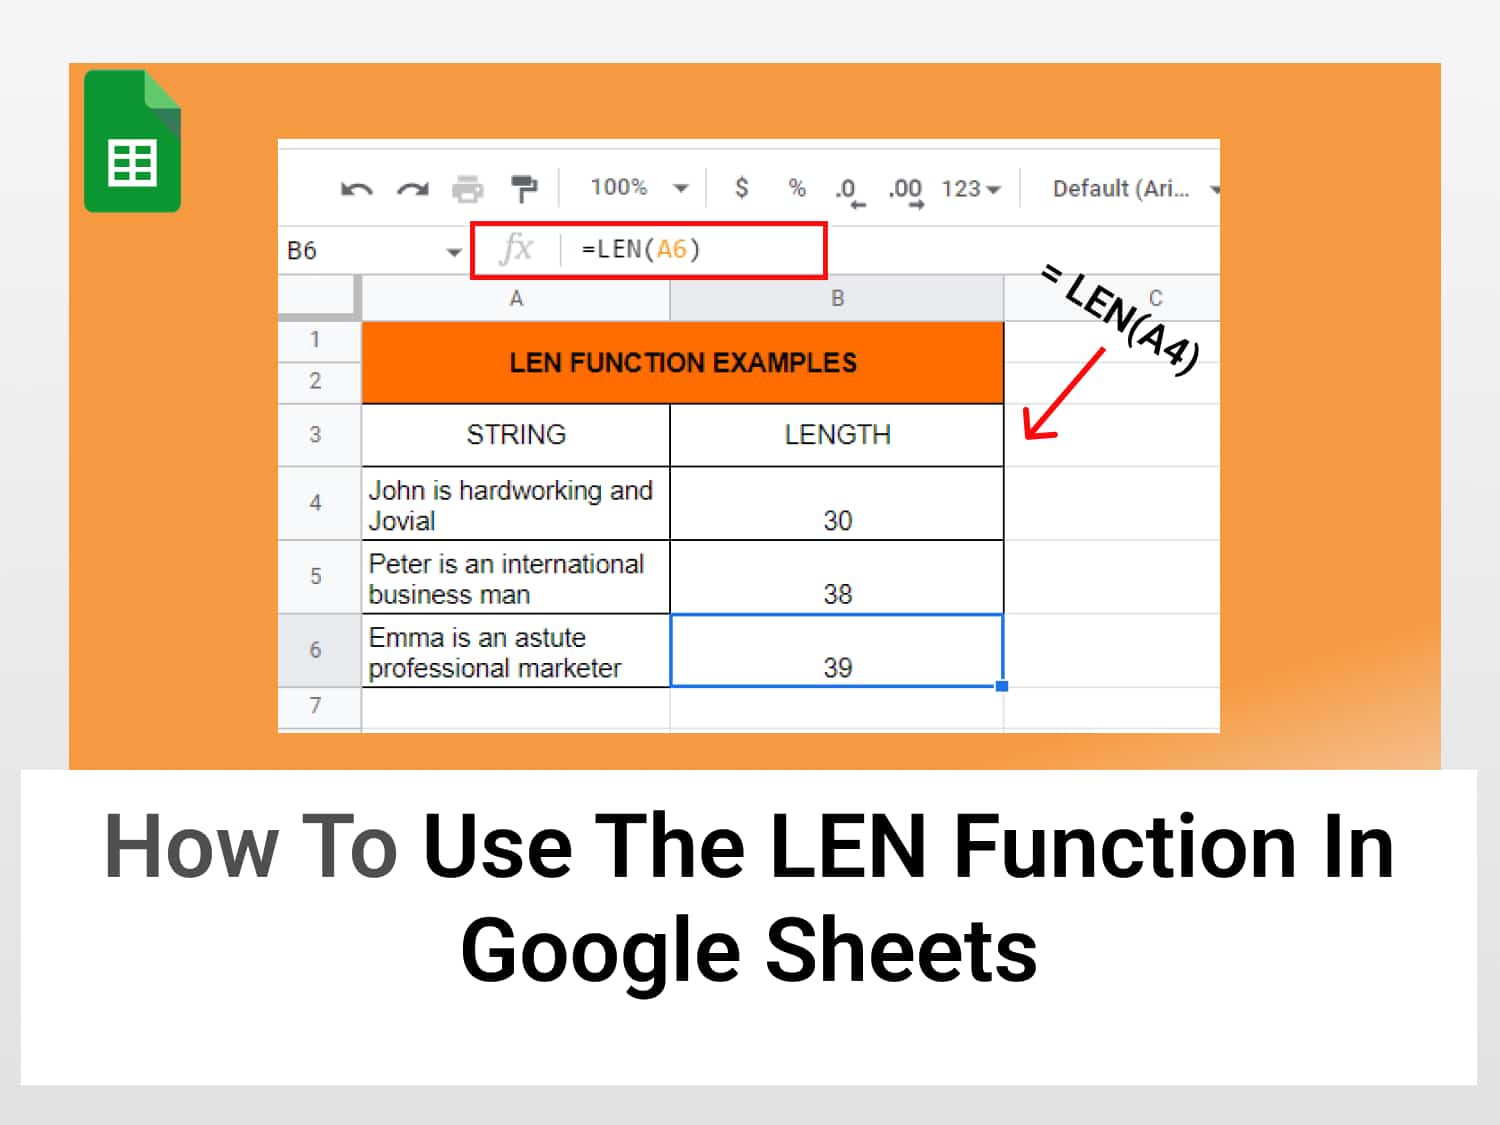 How to use the LEN function in Google Sheets to count the number of letters